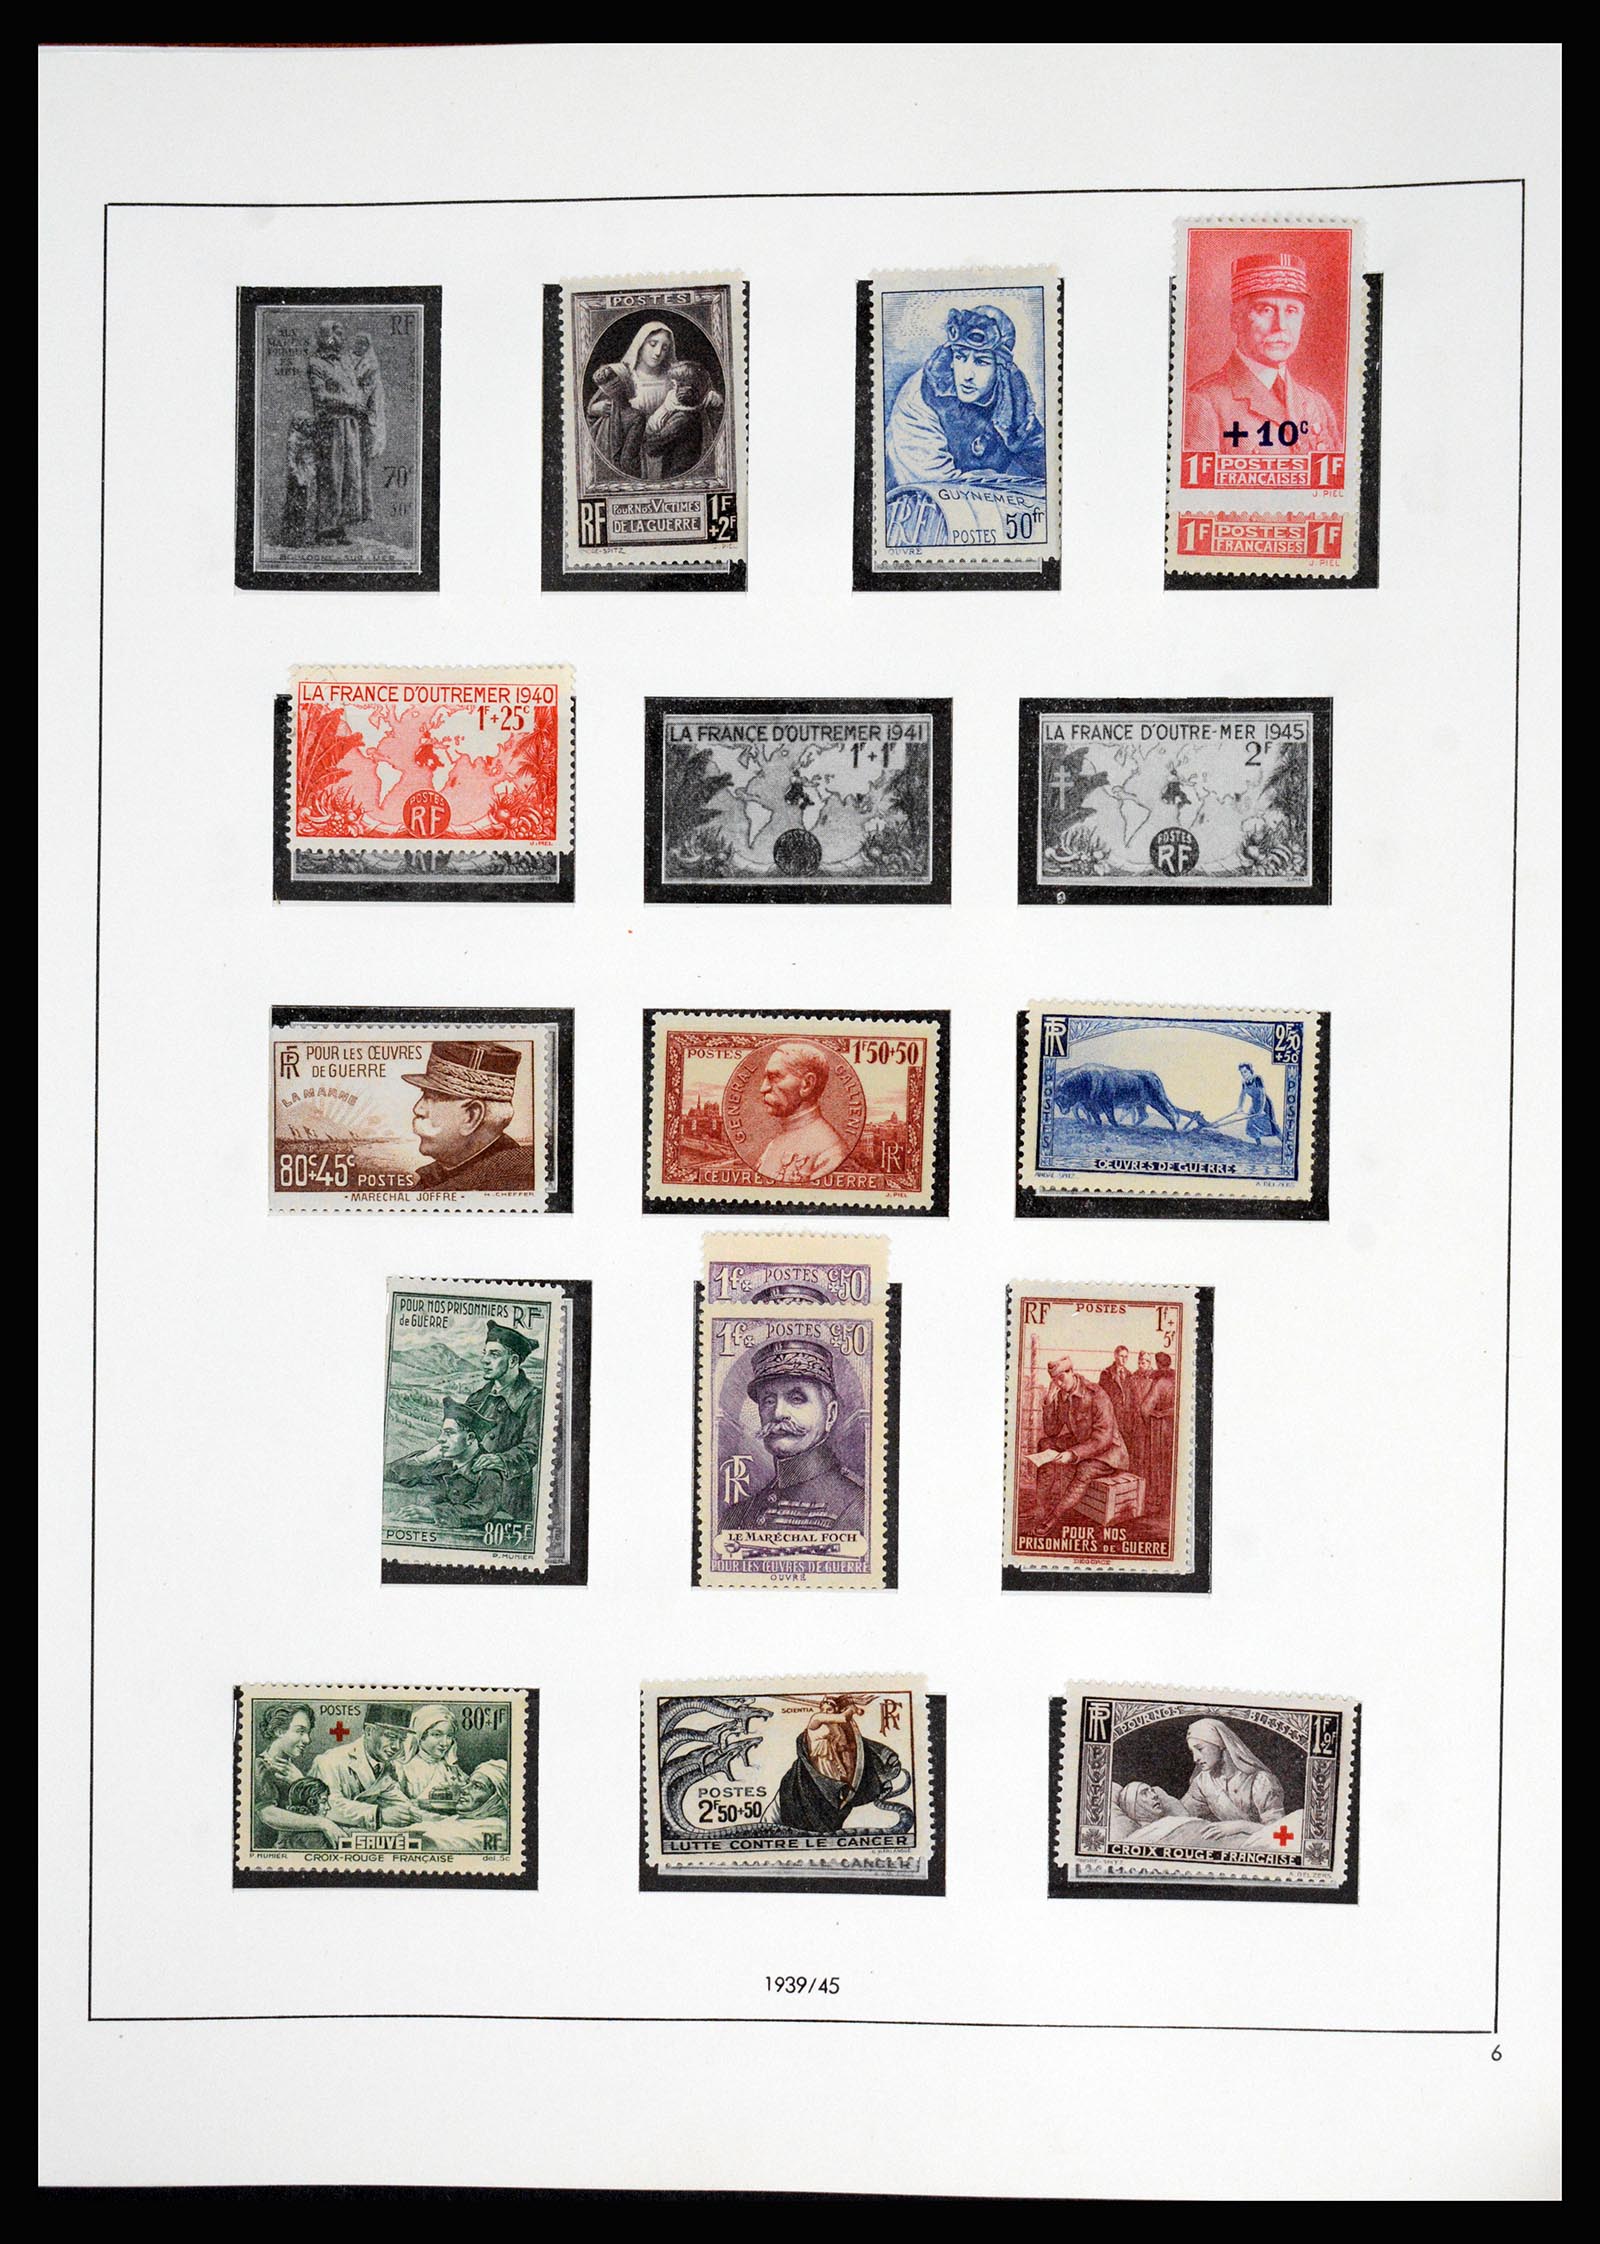 37140 035 - Stamp collection 37140 France 1849-1945.